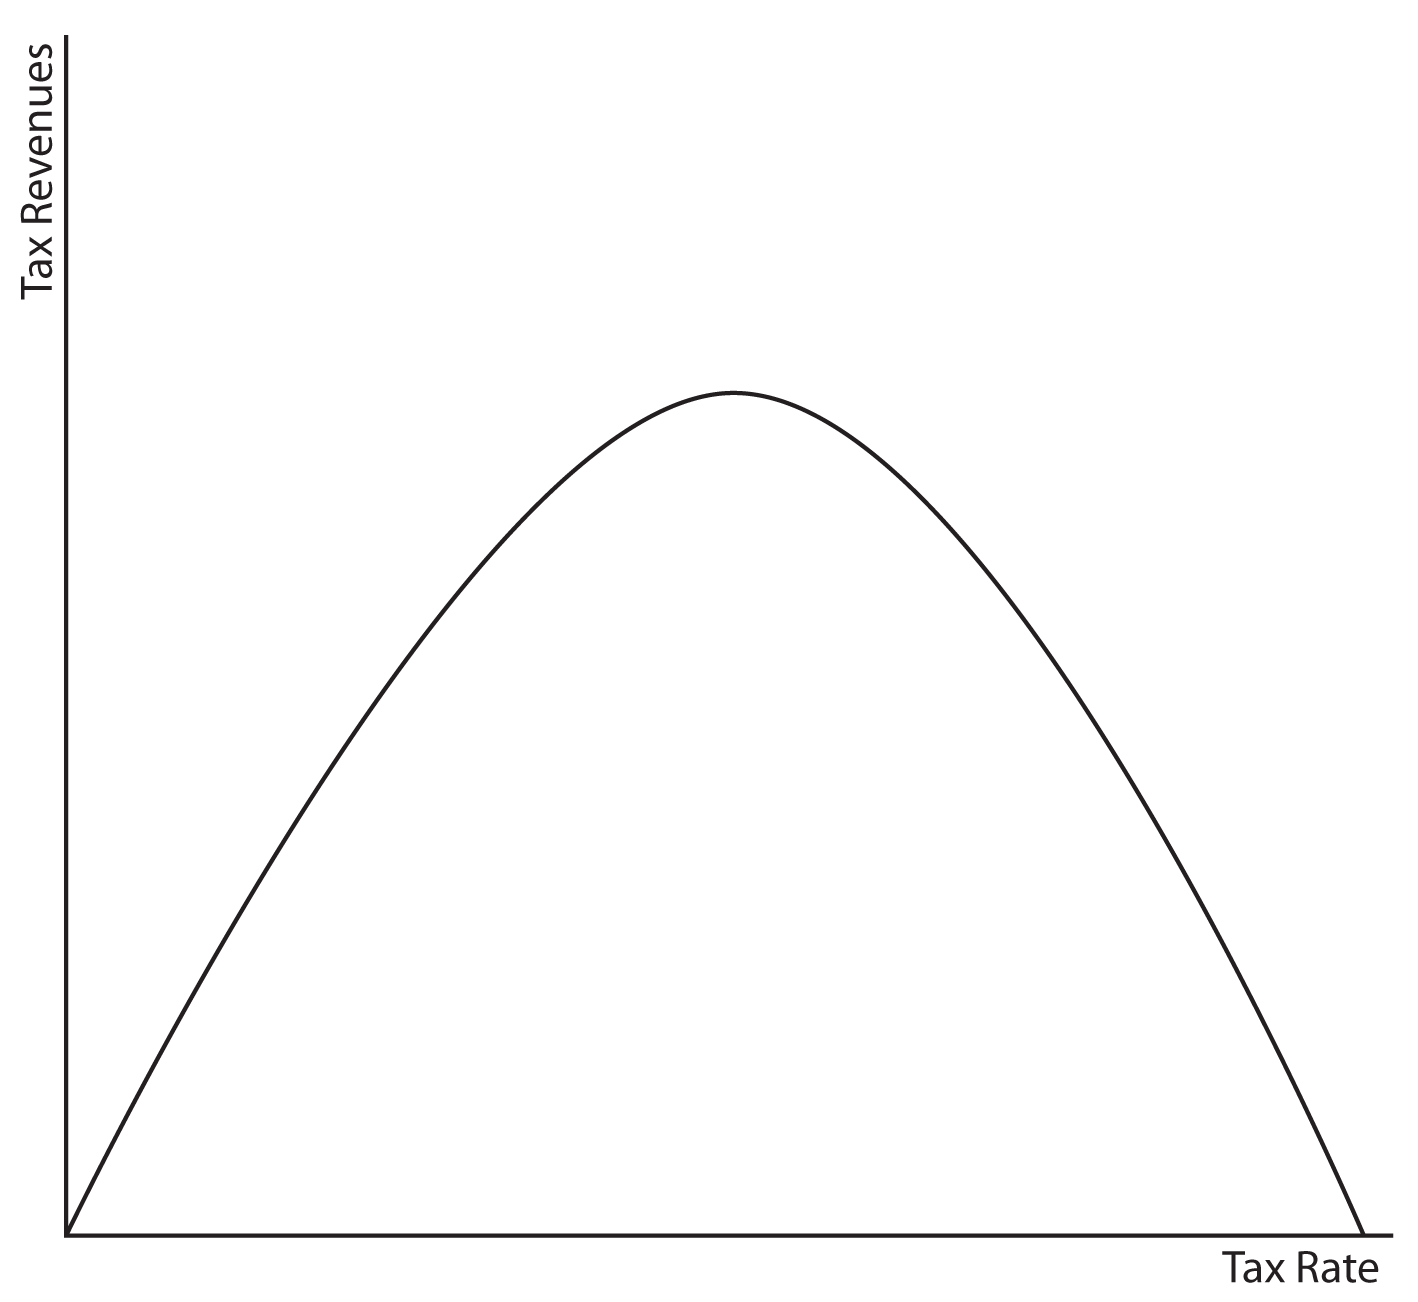 Image 9.04. This image depicts one graph. This graph's X axis is labeled Tax Rate, and its Y axis is labeled Tax Revenues. A line beginning at the origin follows the form of an inverted parabola.